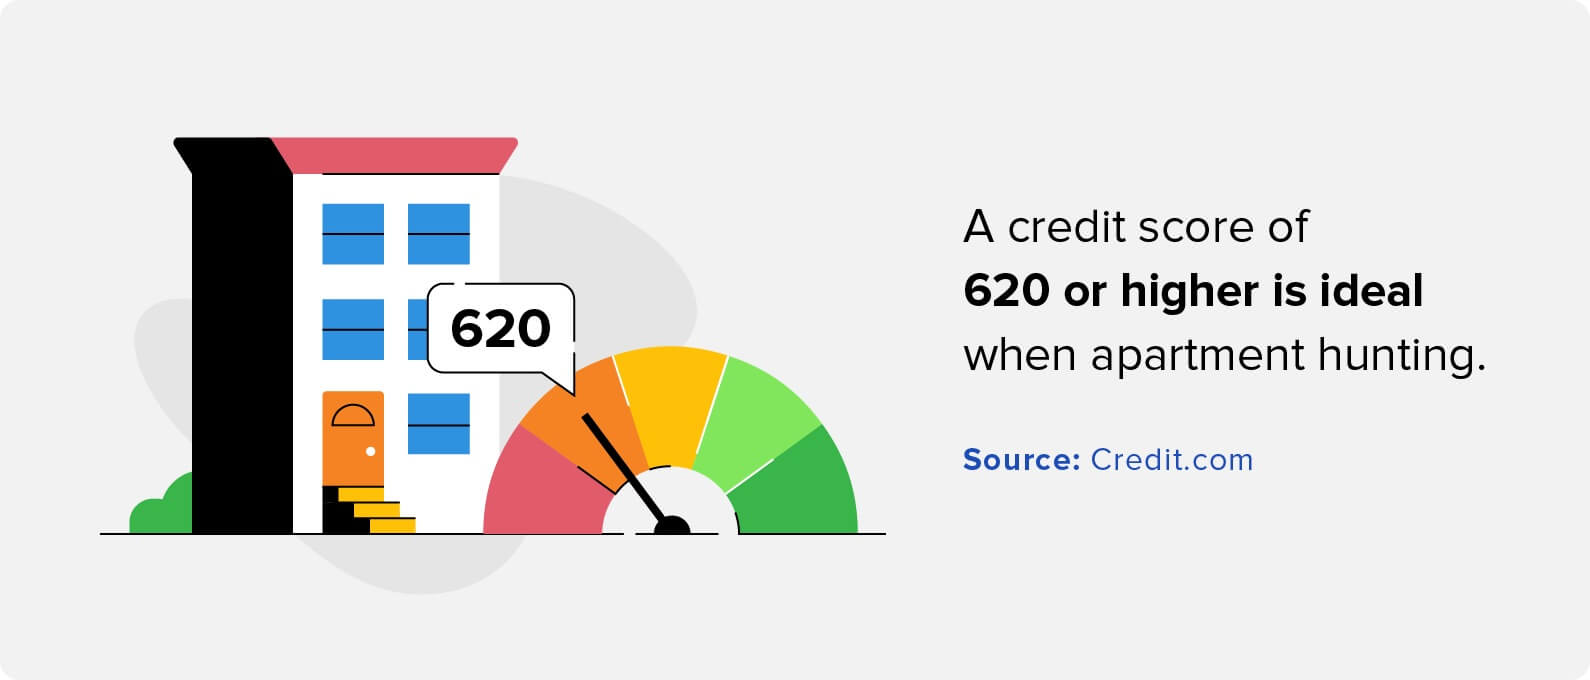 a credit score of 620 or higher is ideal when apartment hunting.